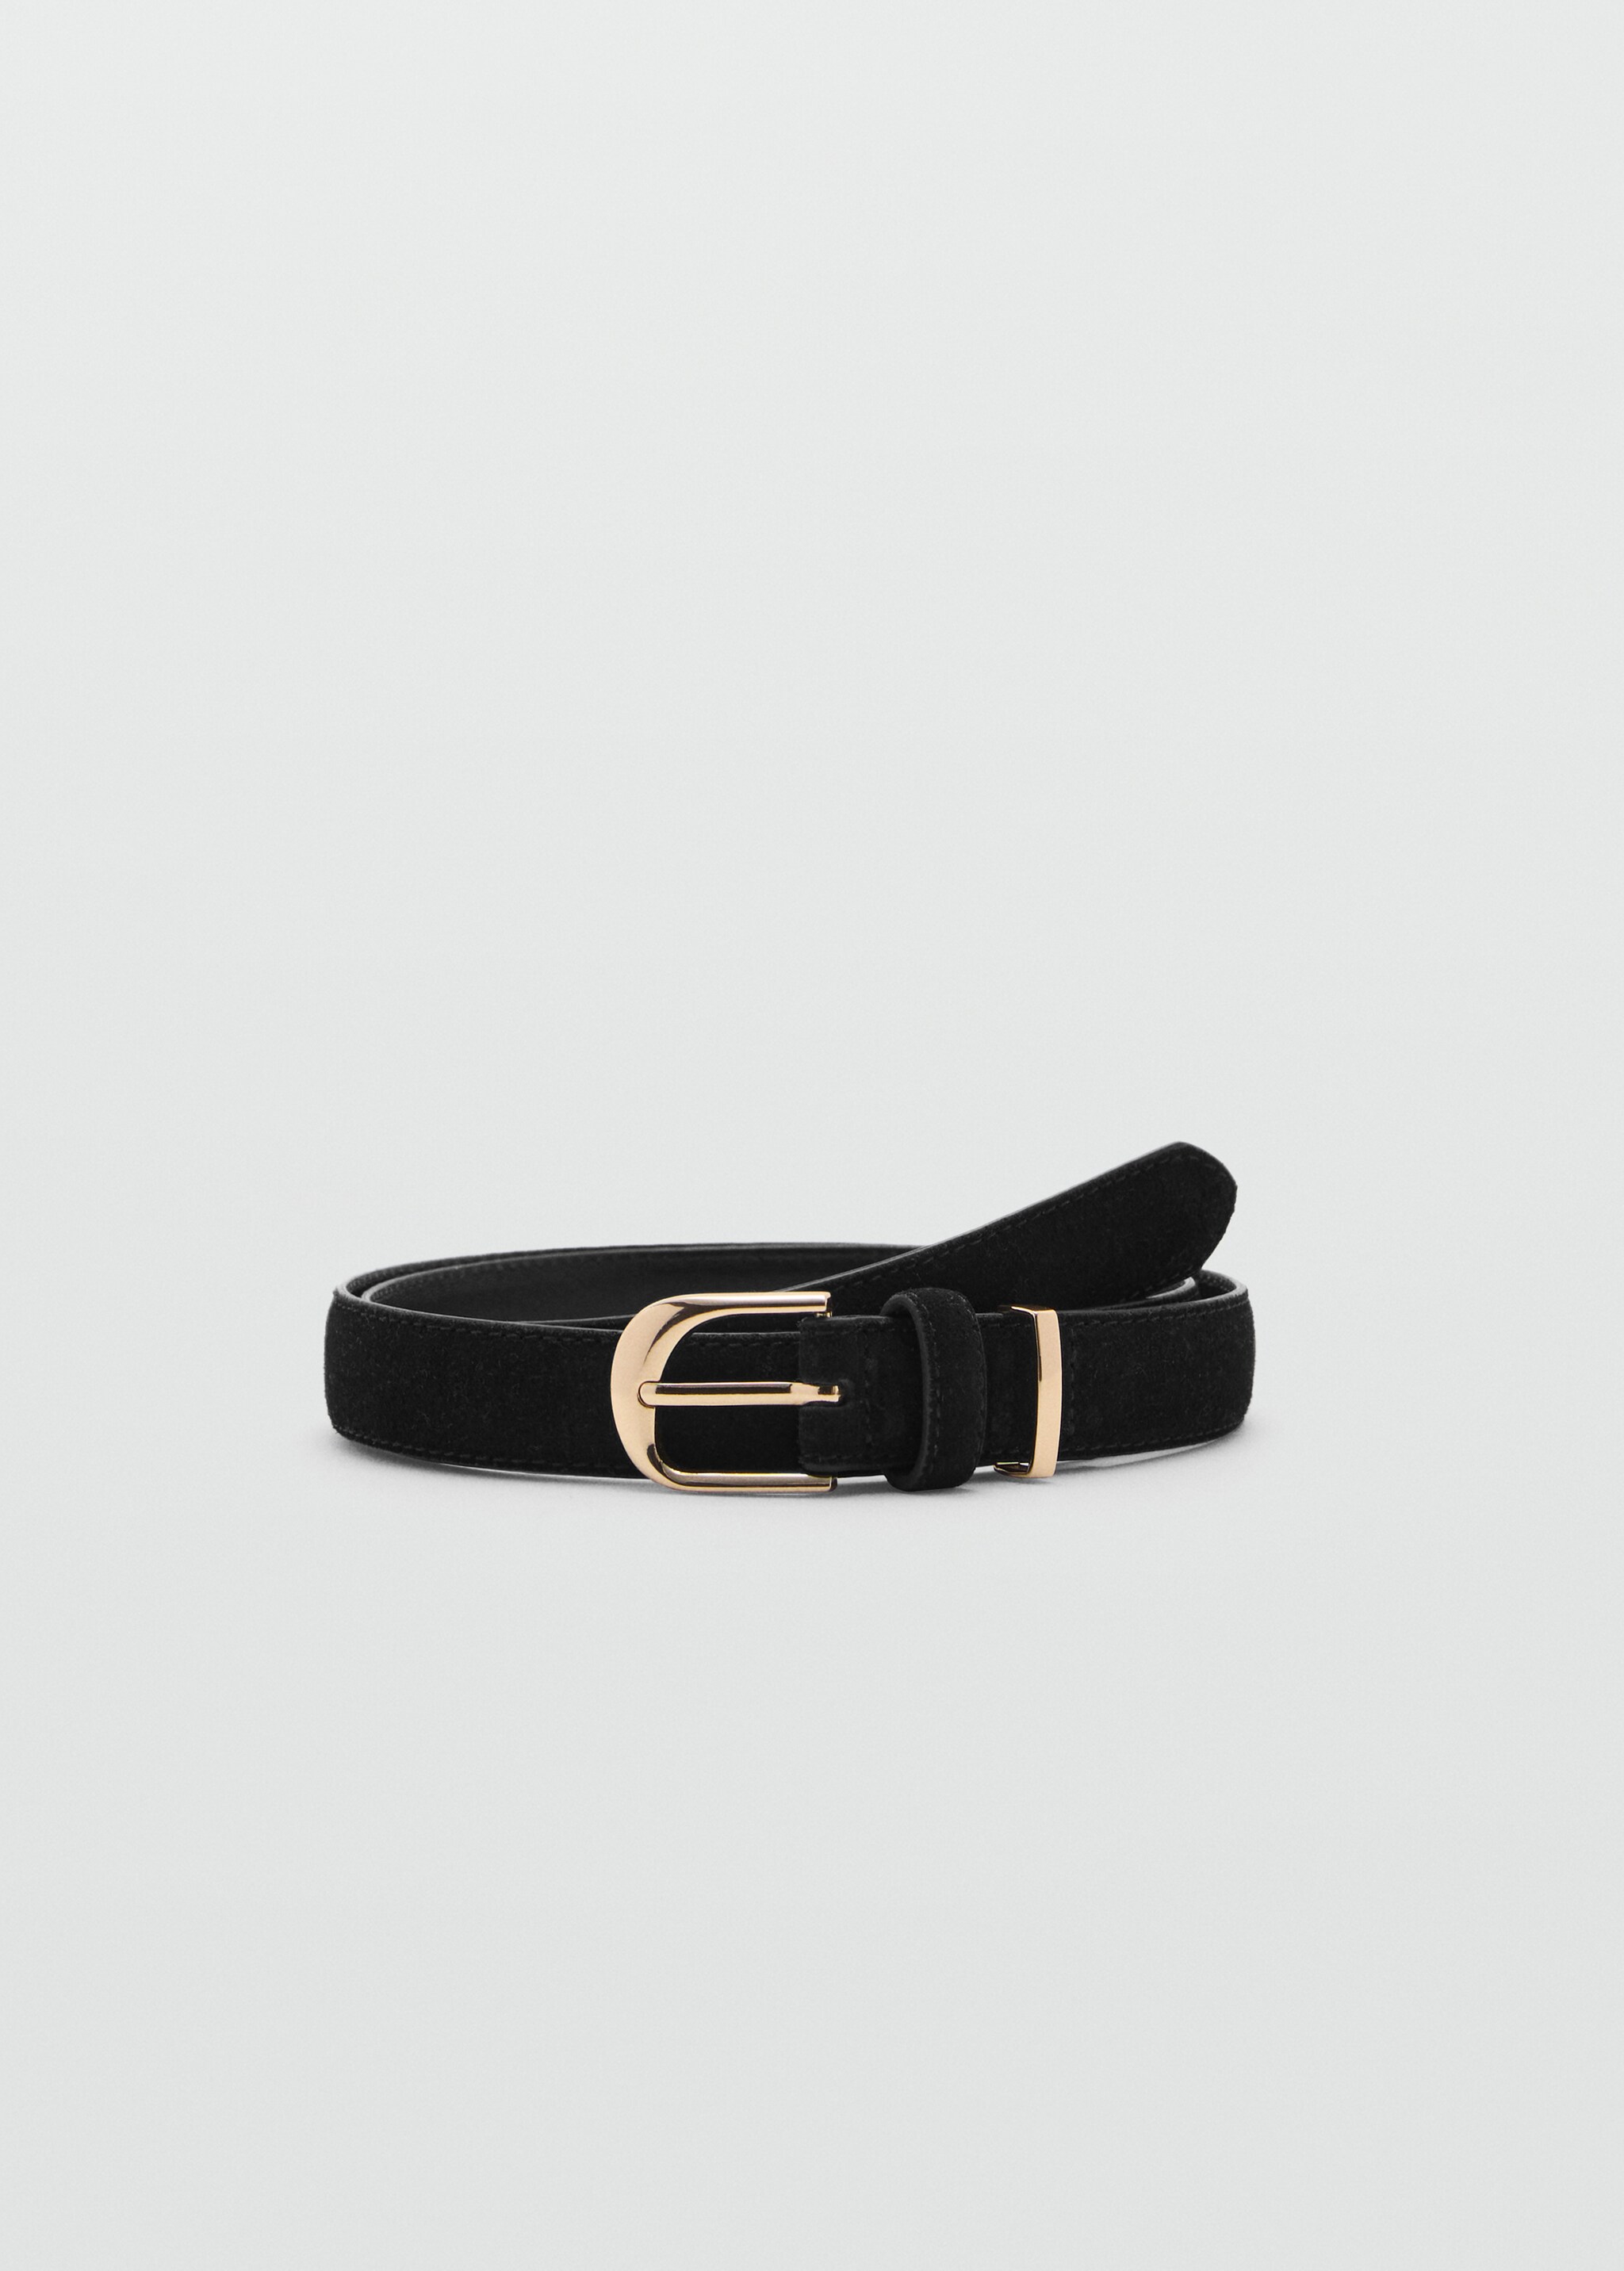 Buckle leather belt - Article without model